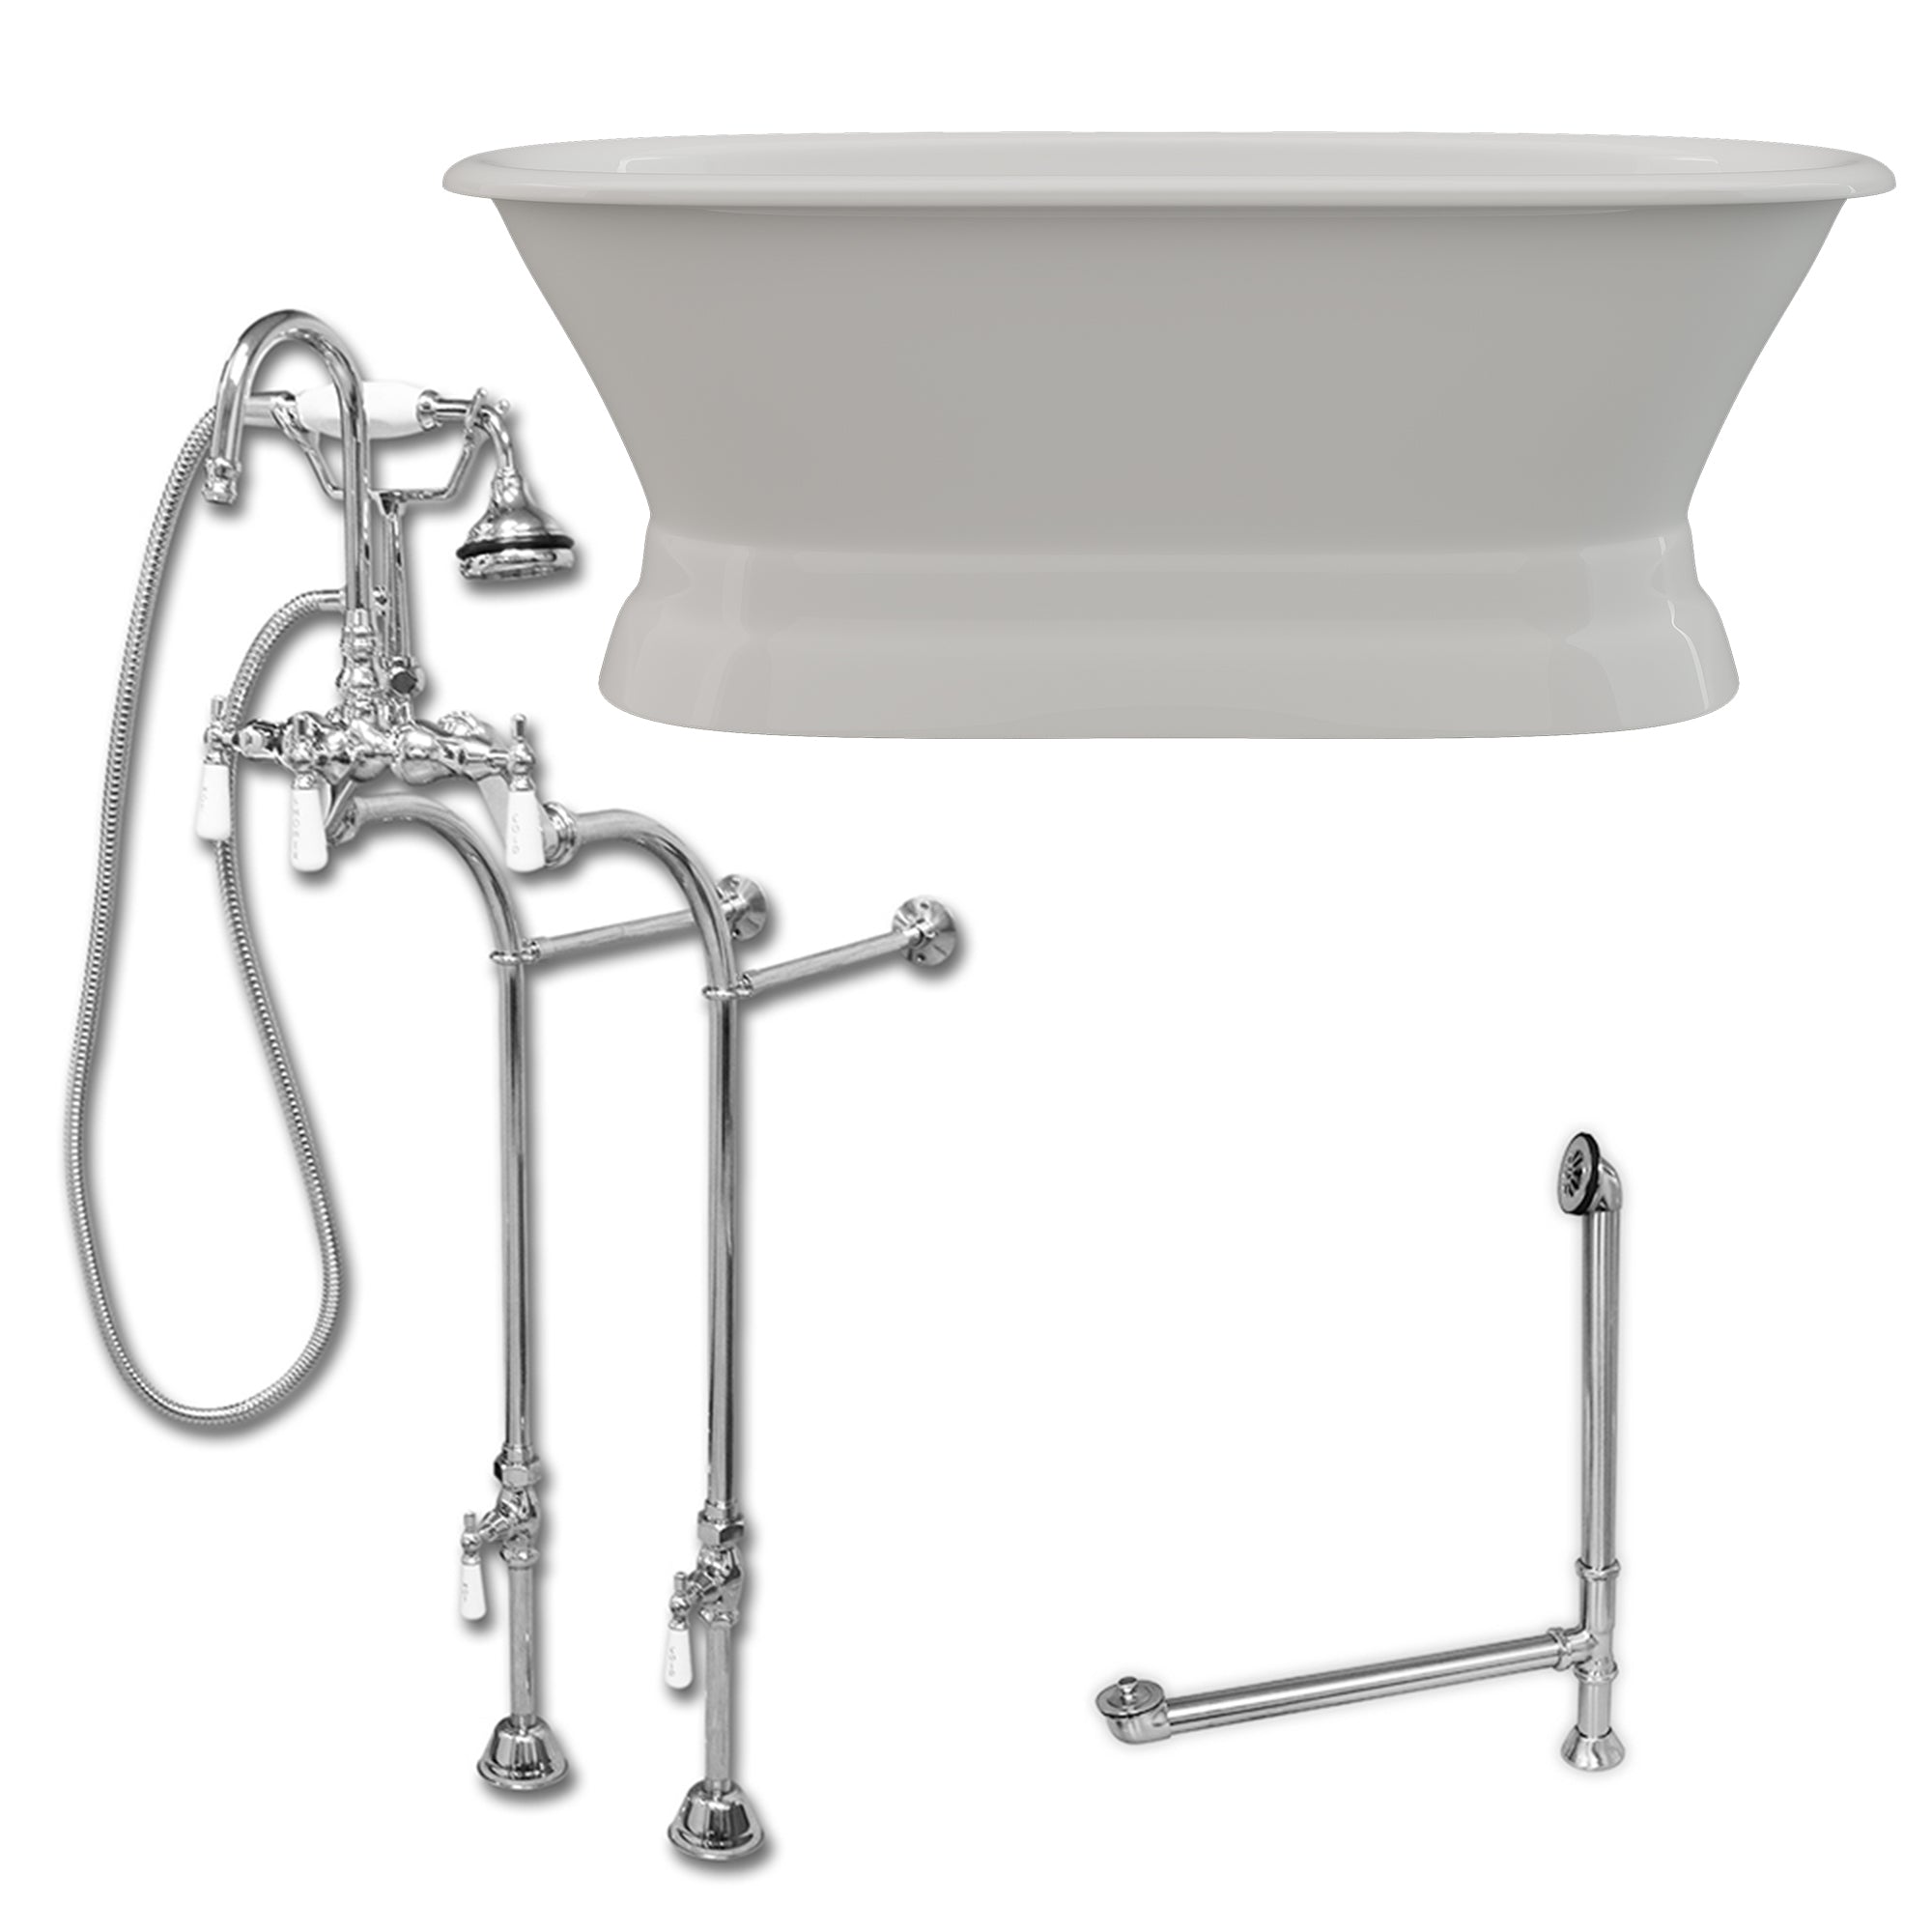 Cambridge Plumbing 66-Inch Double Ended Cast Iron Pedestal Soaking Tub (Porcelain interior and white paint exterior) and Complete Freestanding Plumbing Package (Brushed nickel) DE66-PED-398684-PKG-NH - Vital Hydrotherapy